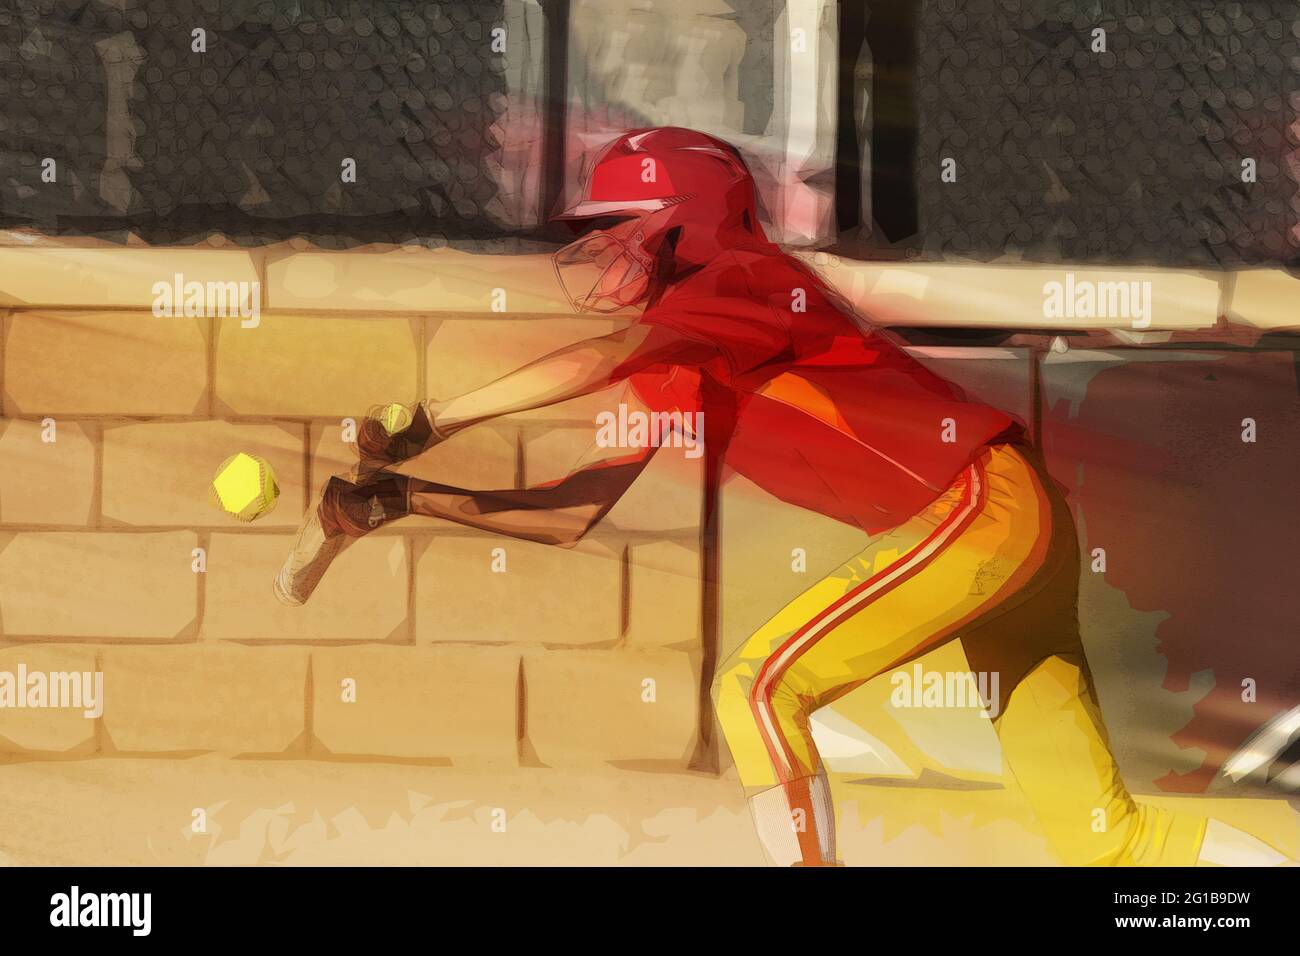 A photo illustration of a female softball player in the batters box. Stock Photo